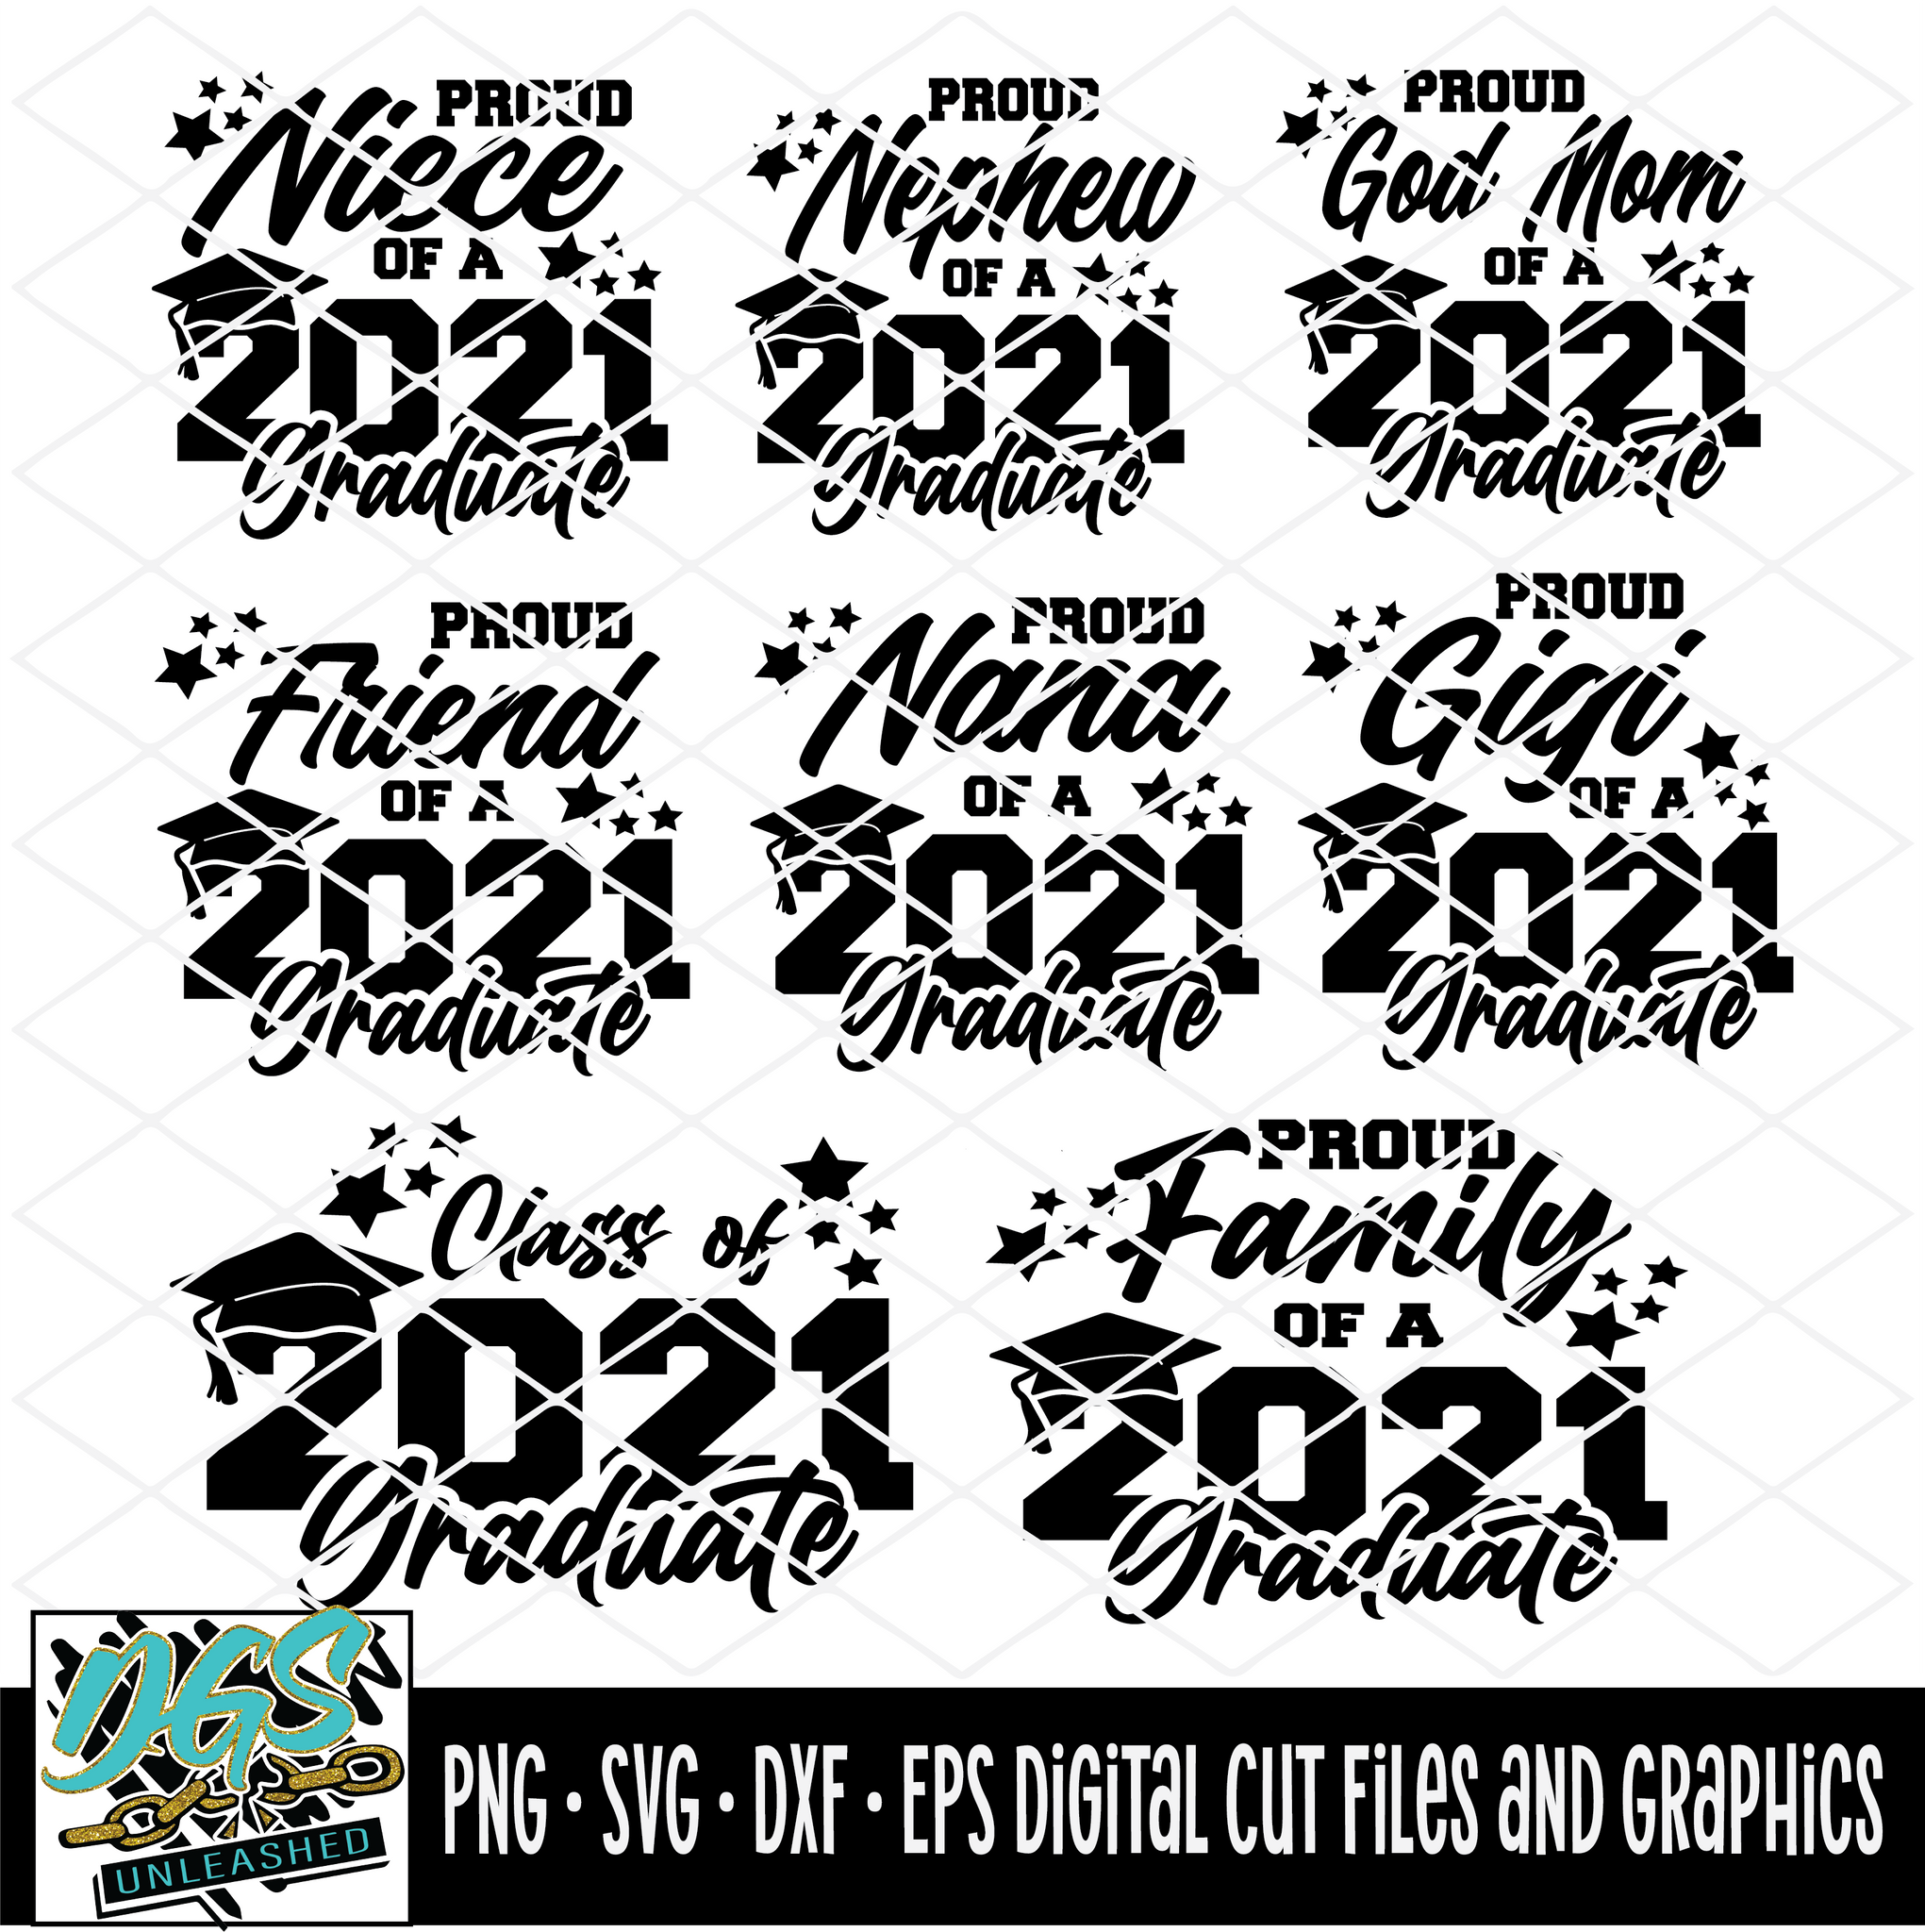 Download Proud Family of 2021 Graduate SVG, DXF, PNG, and EPS ...